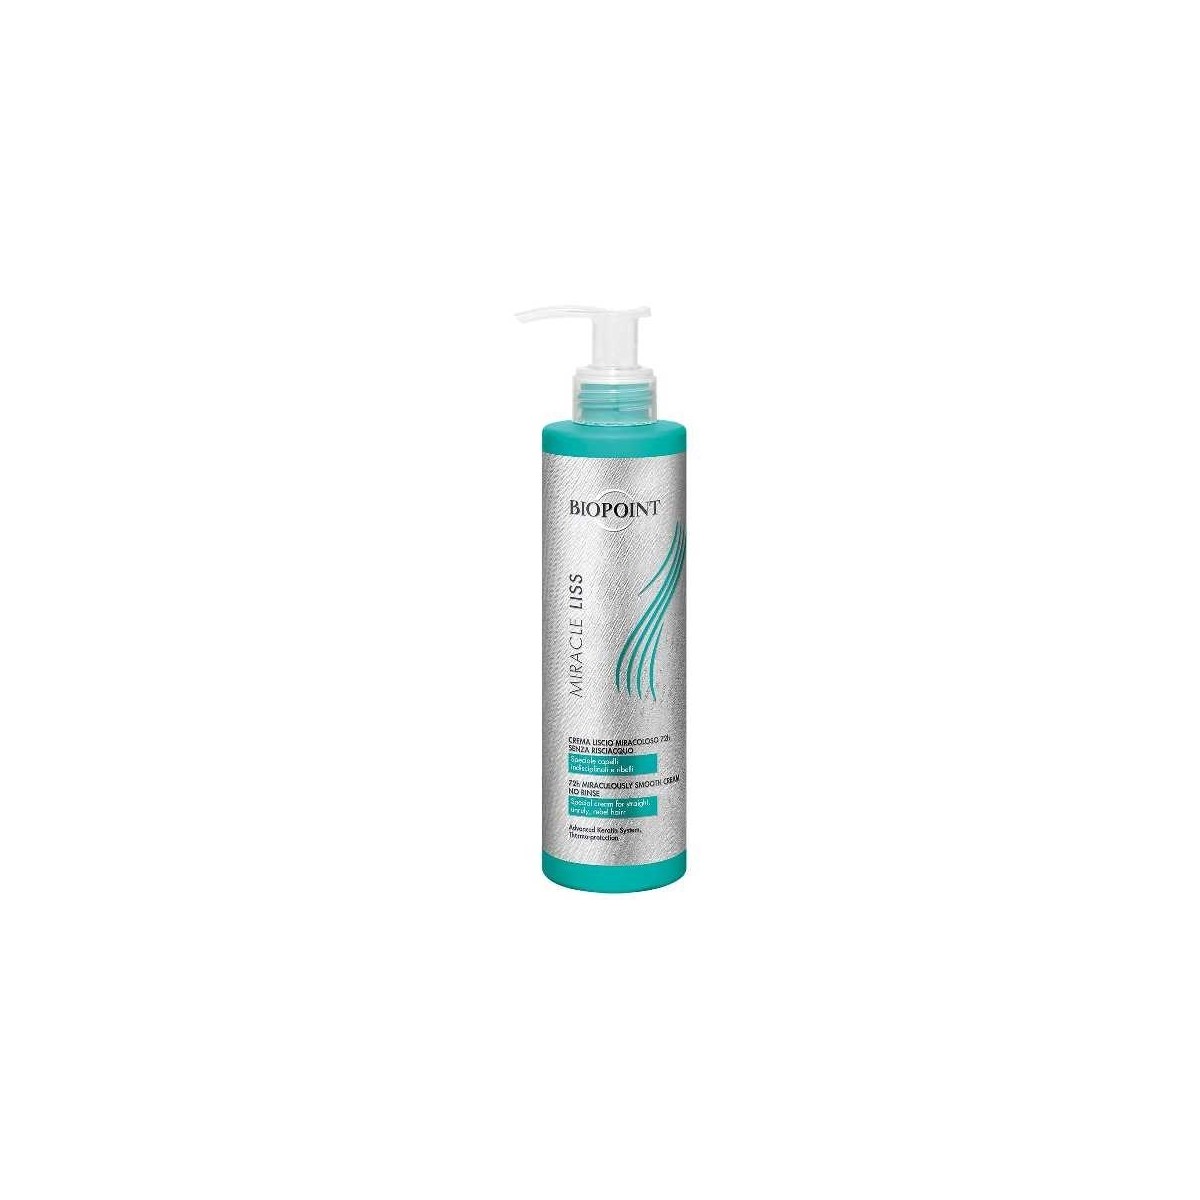 Biopoint Personal Miracle Liss Crema Liscio Miracoloso 72 Ore 200ml